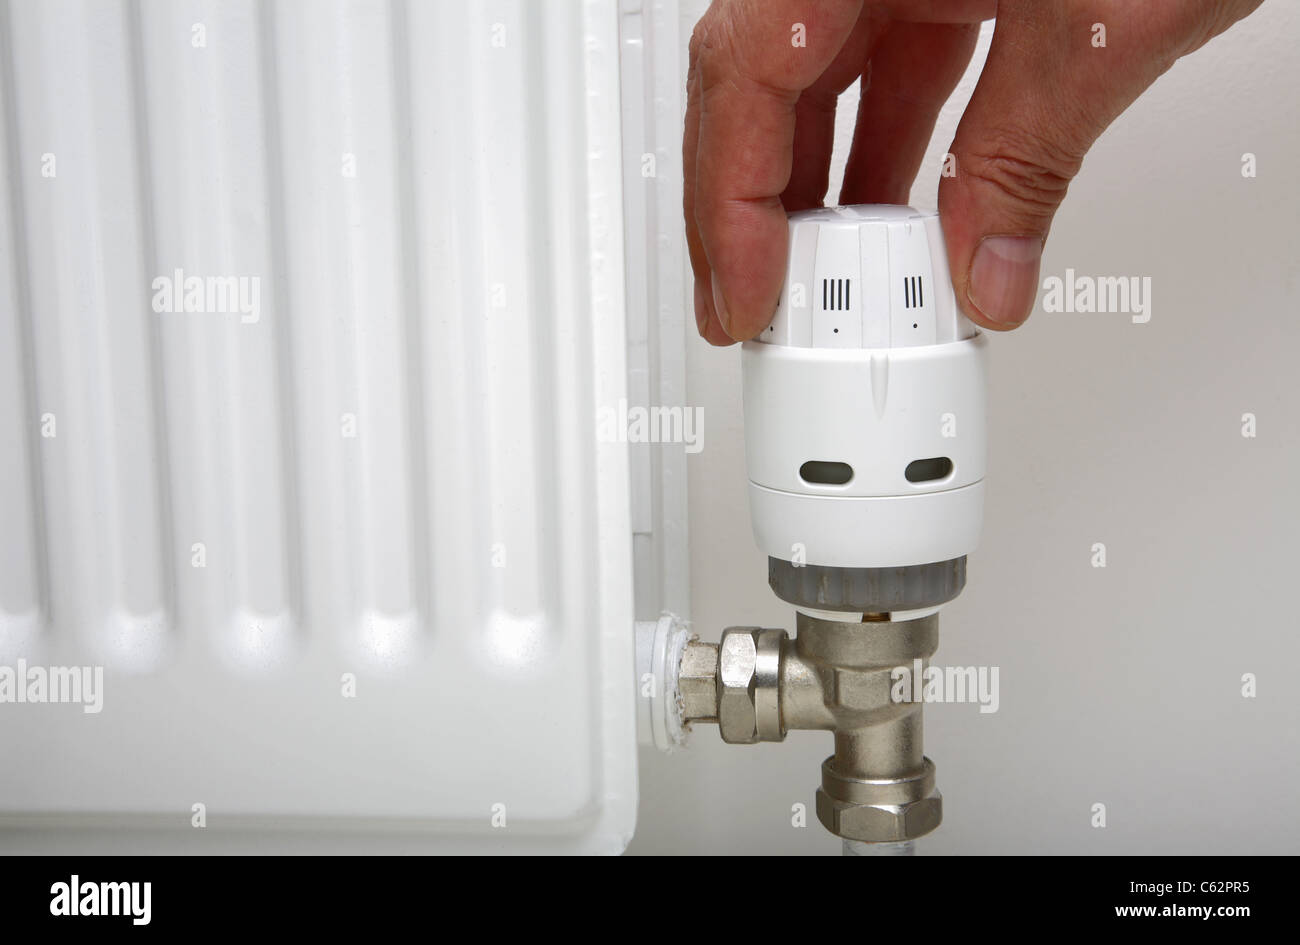 Hand adjusting a thermostatic central heating radiator valve. Stock Photo